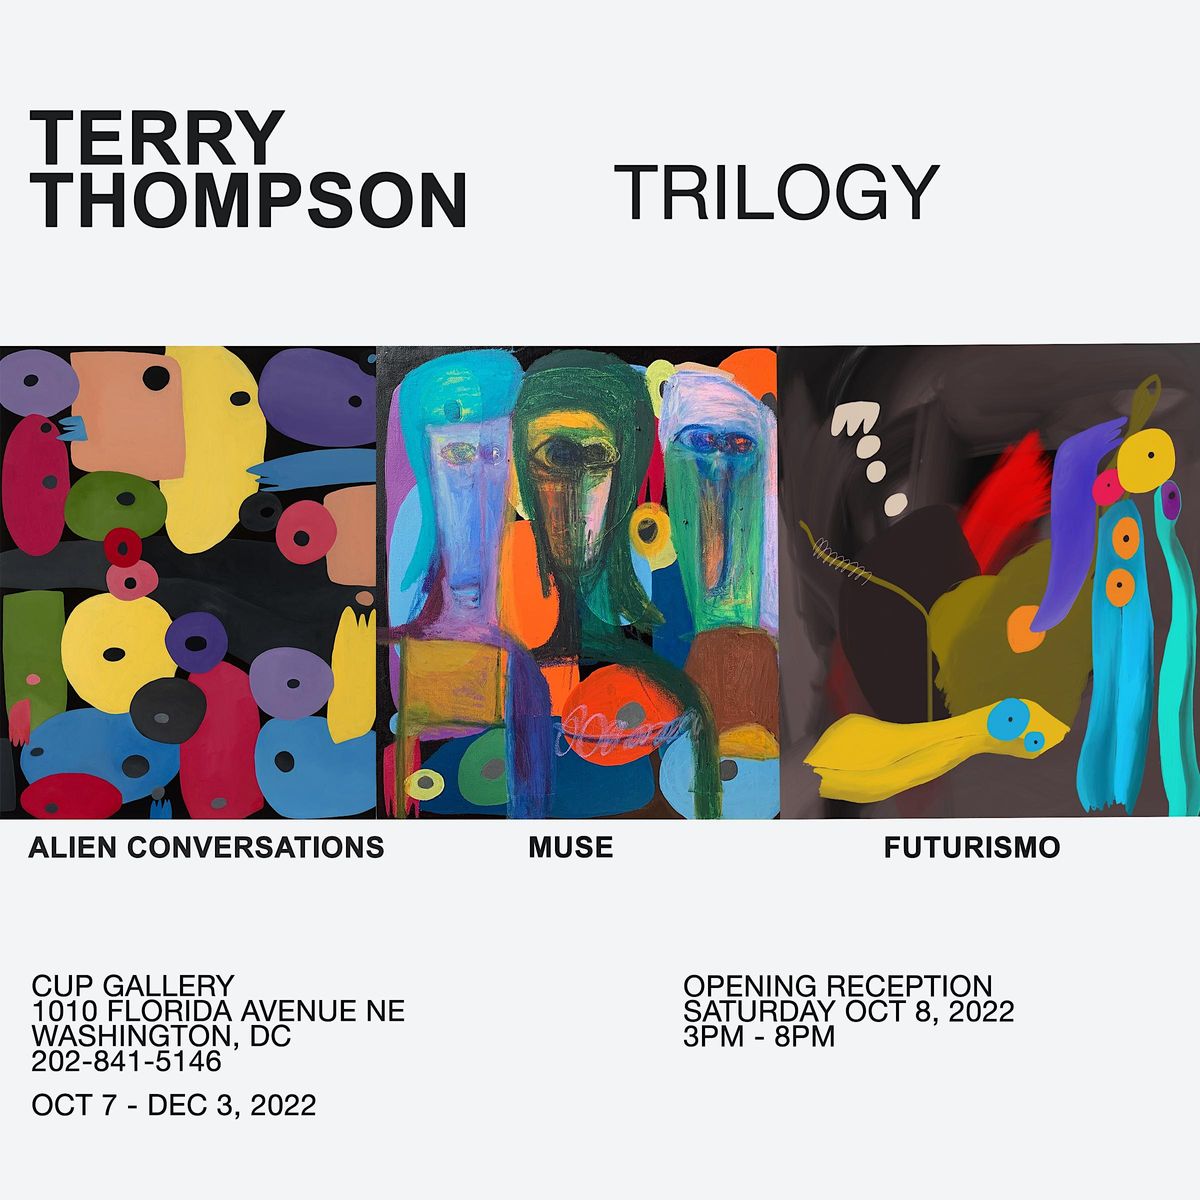 Terry Thompson Art Exhibition  "Trilogy" at  CUP Gallery Washington DC